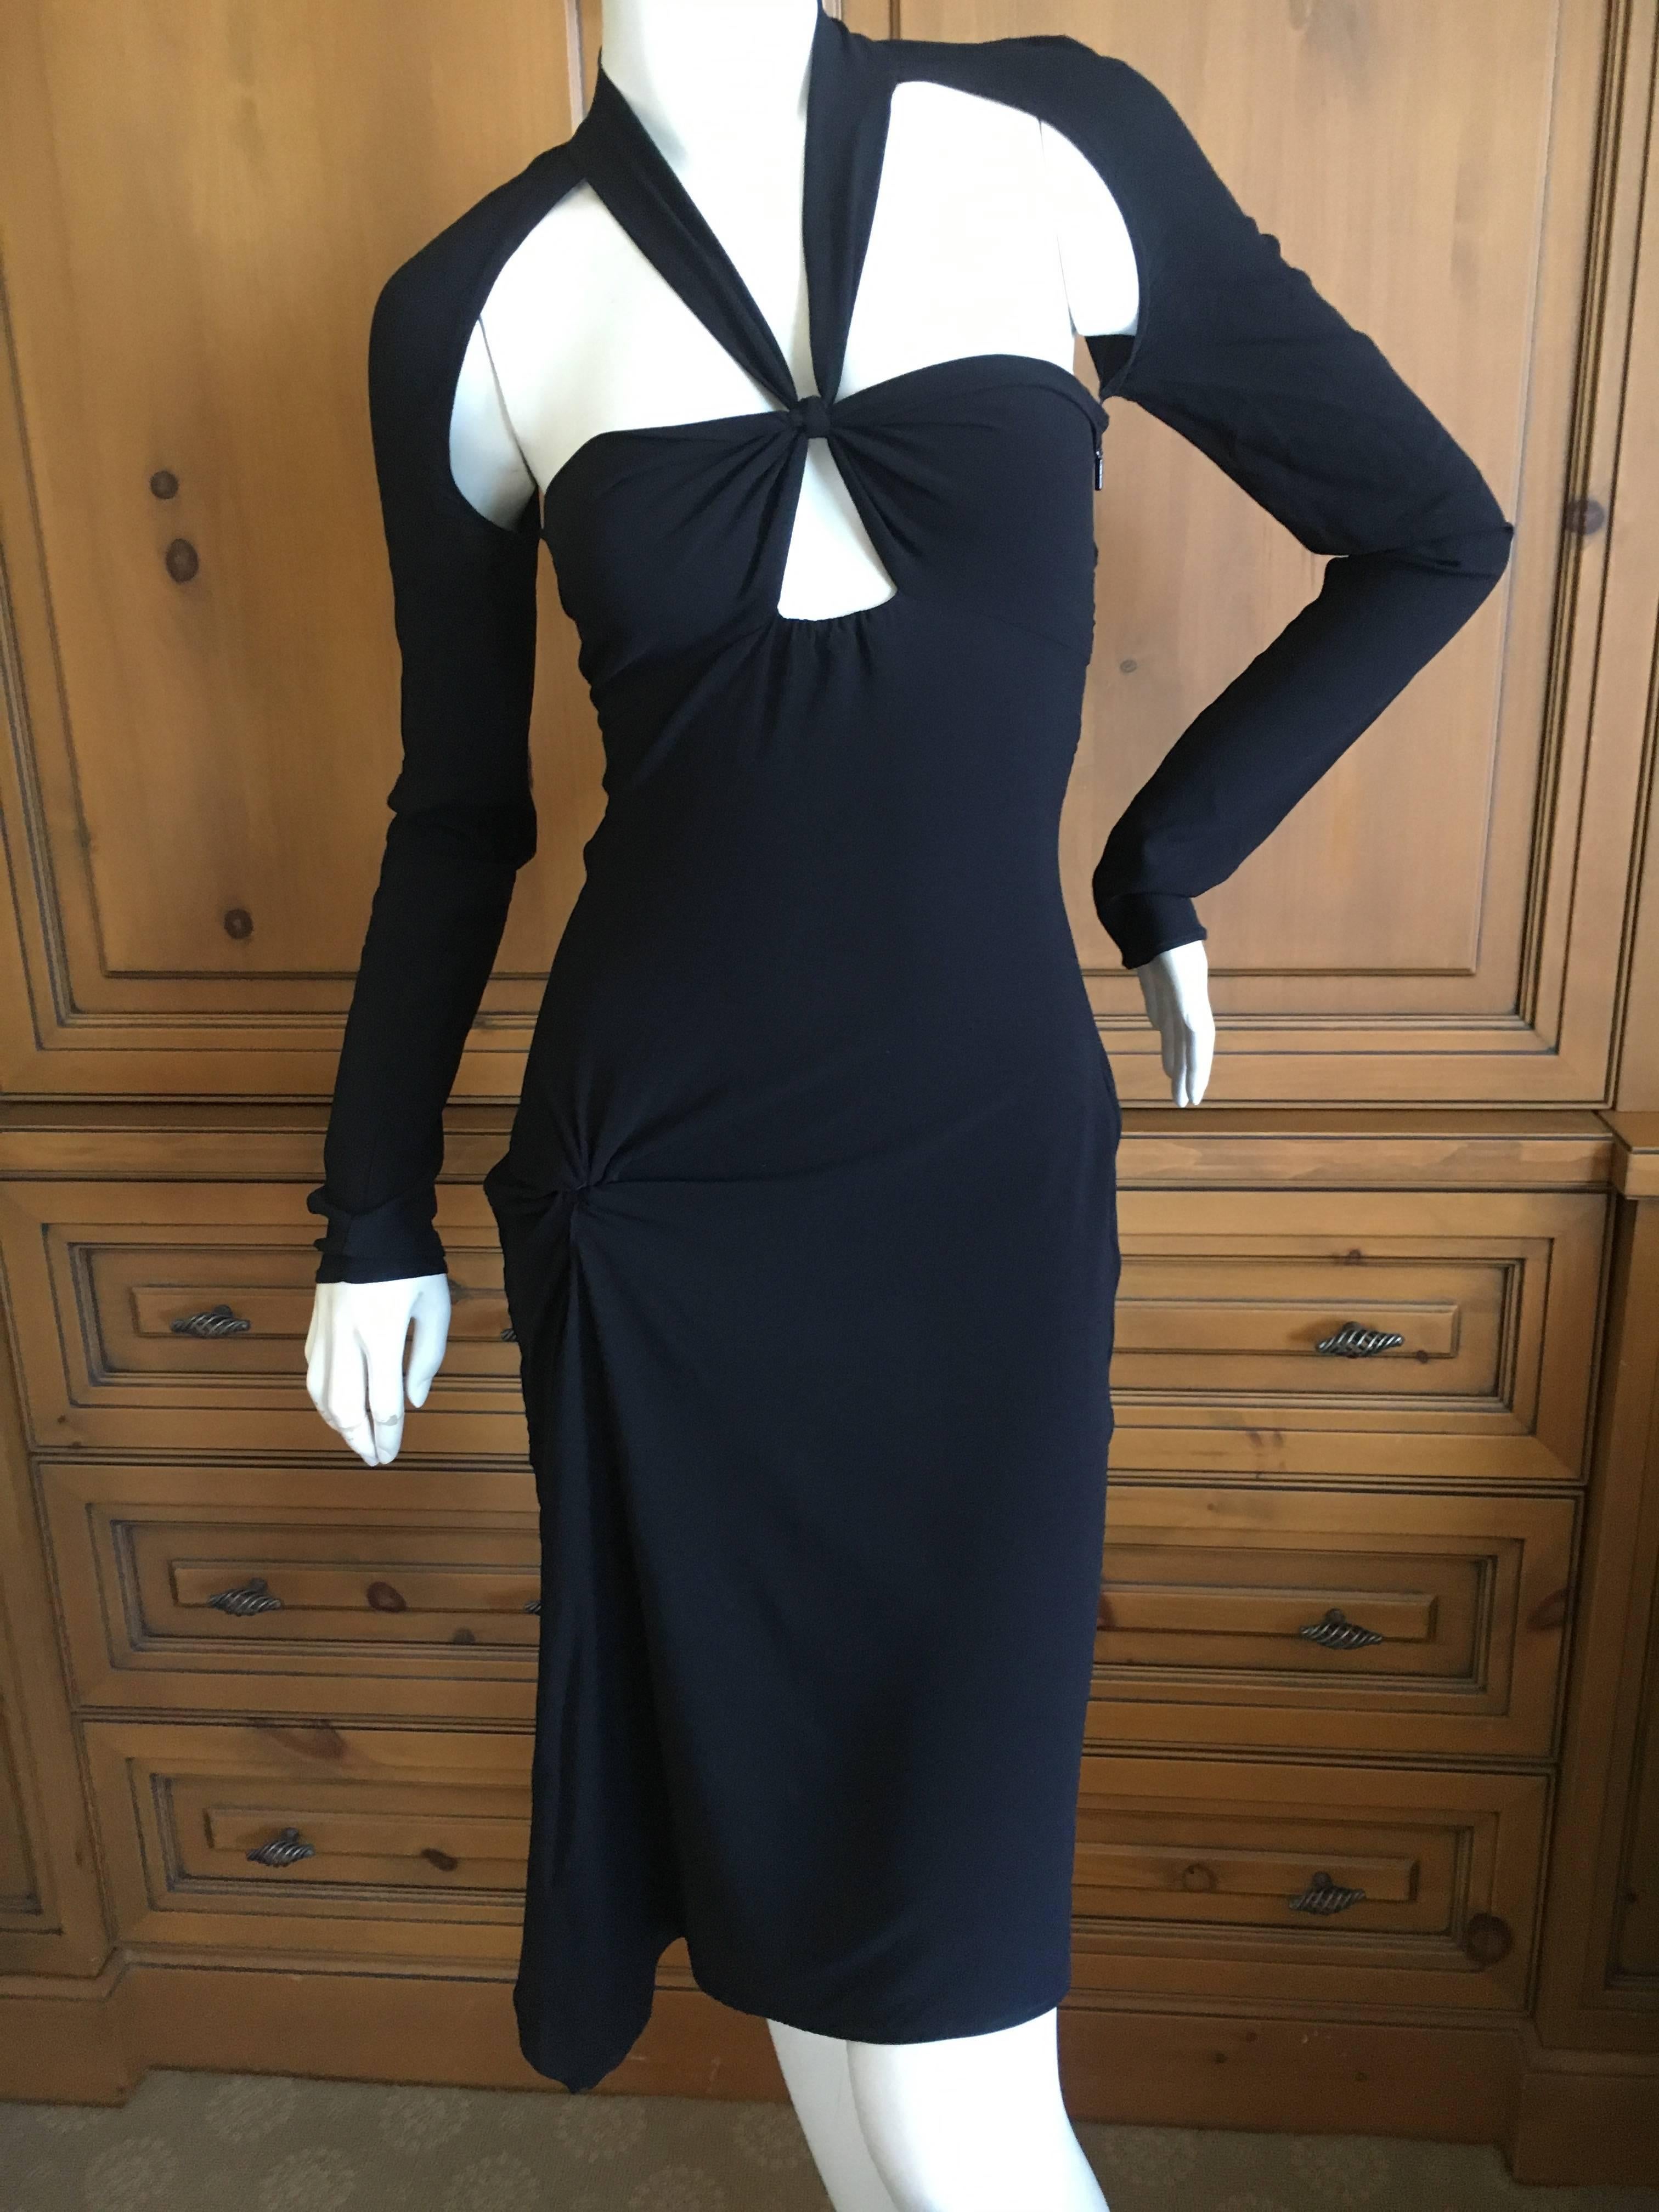 Gucci by Tom Ford Black Backless Key Hole Dress.
Iconic Tom Ford for Gucci.
Size 40
Bust 36